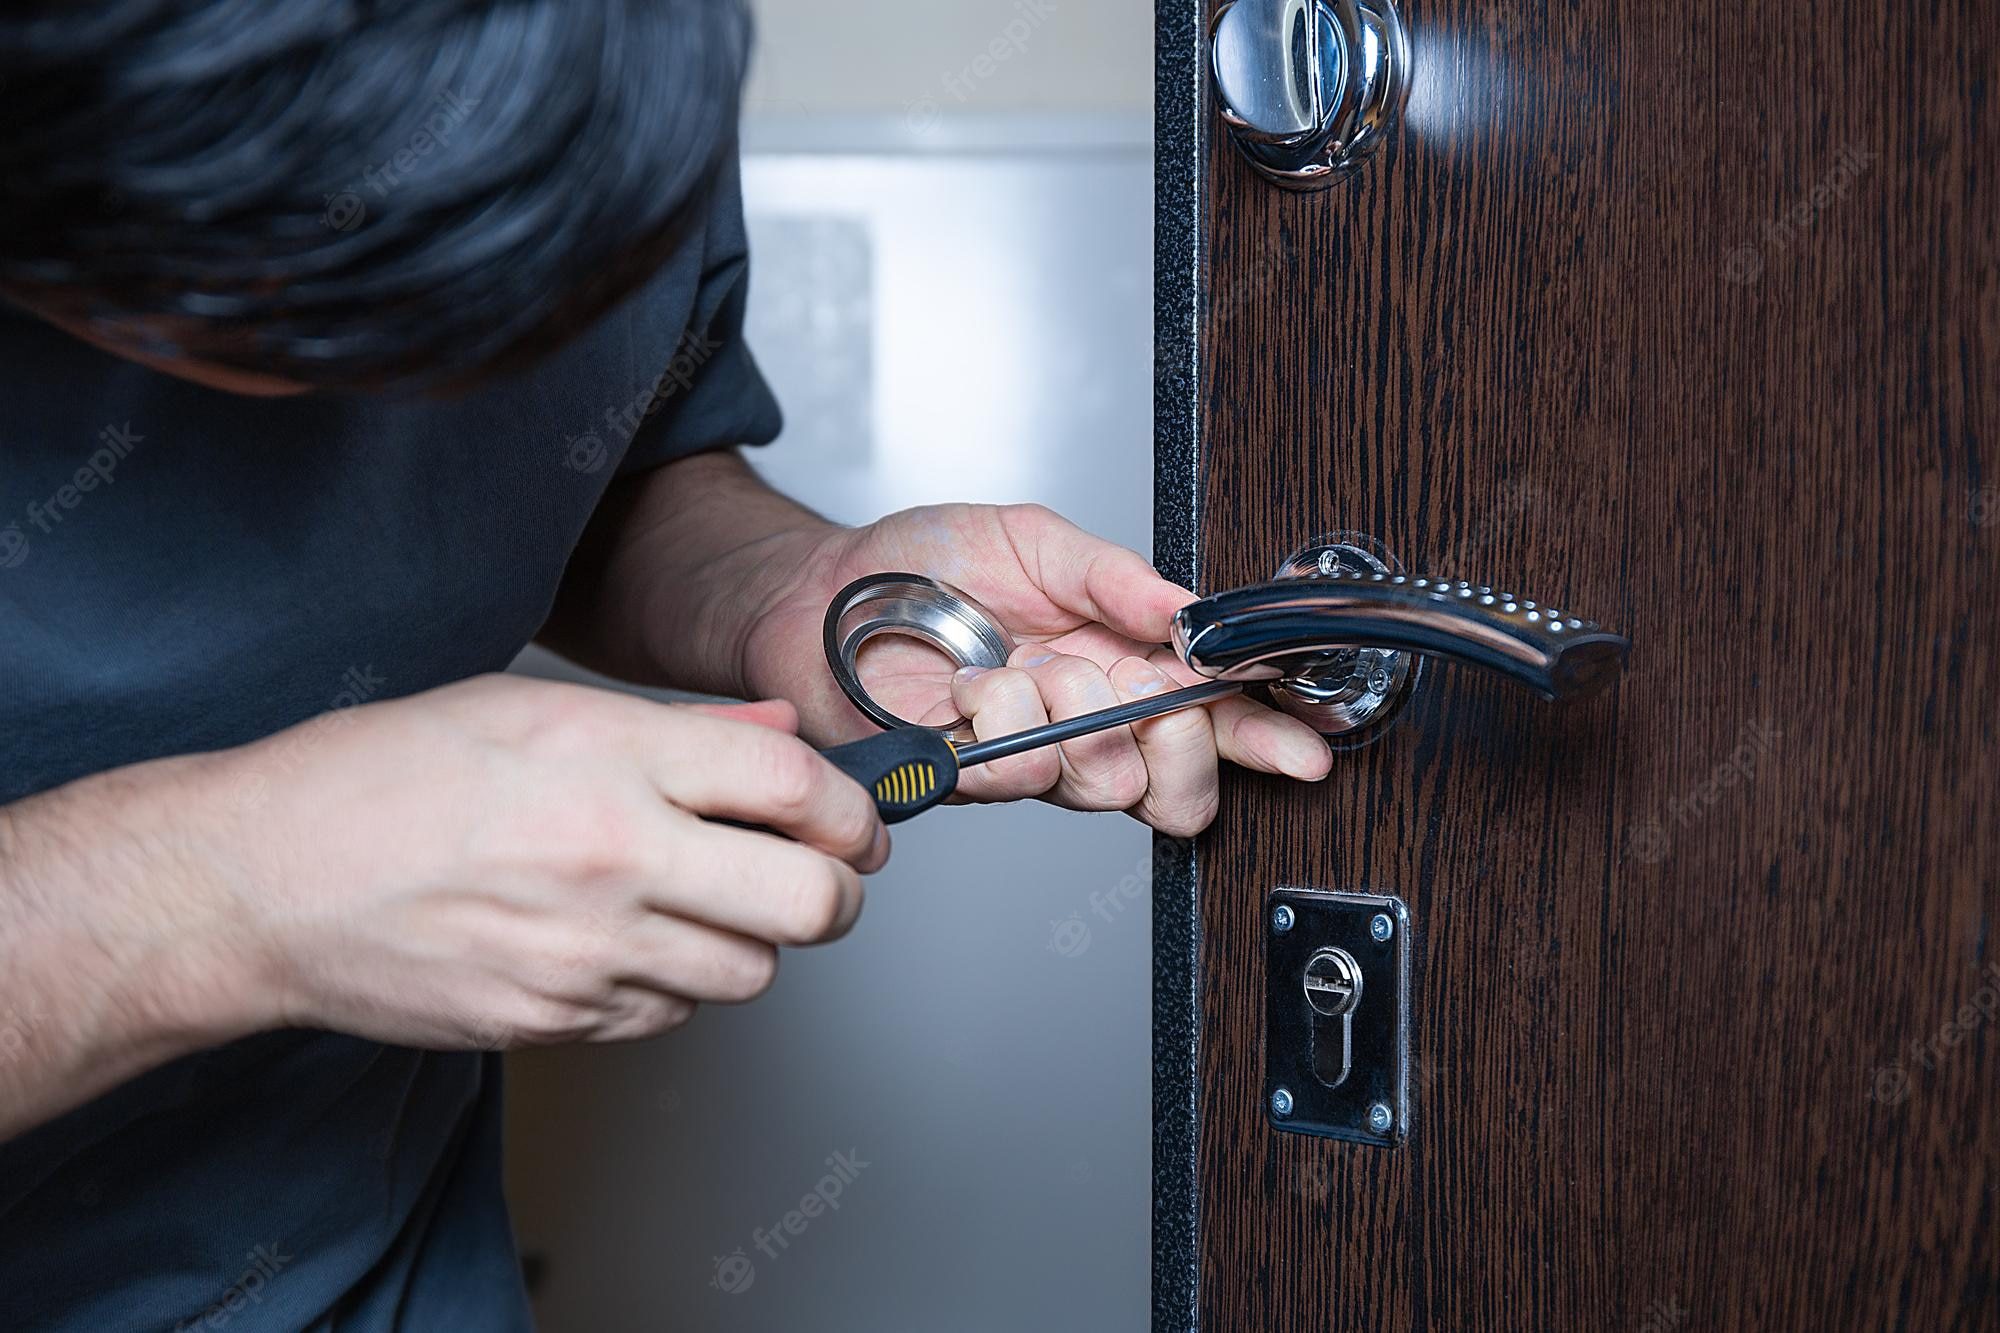 Coral Springs 24/7 Locksmith - Why us?